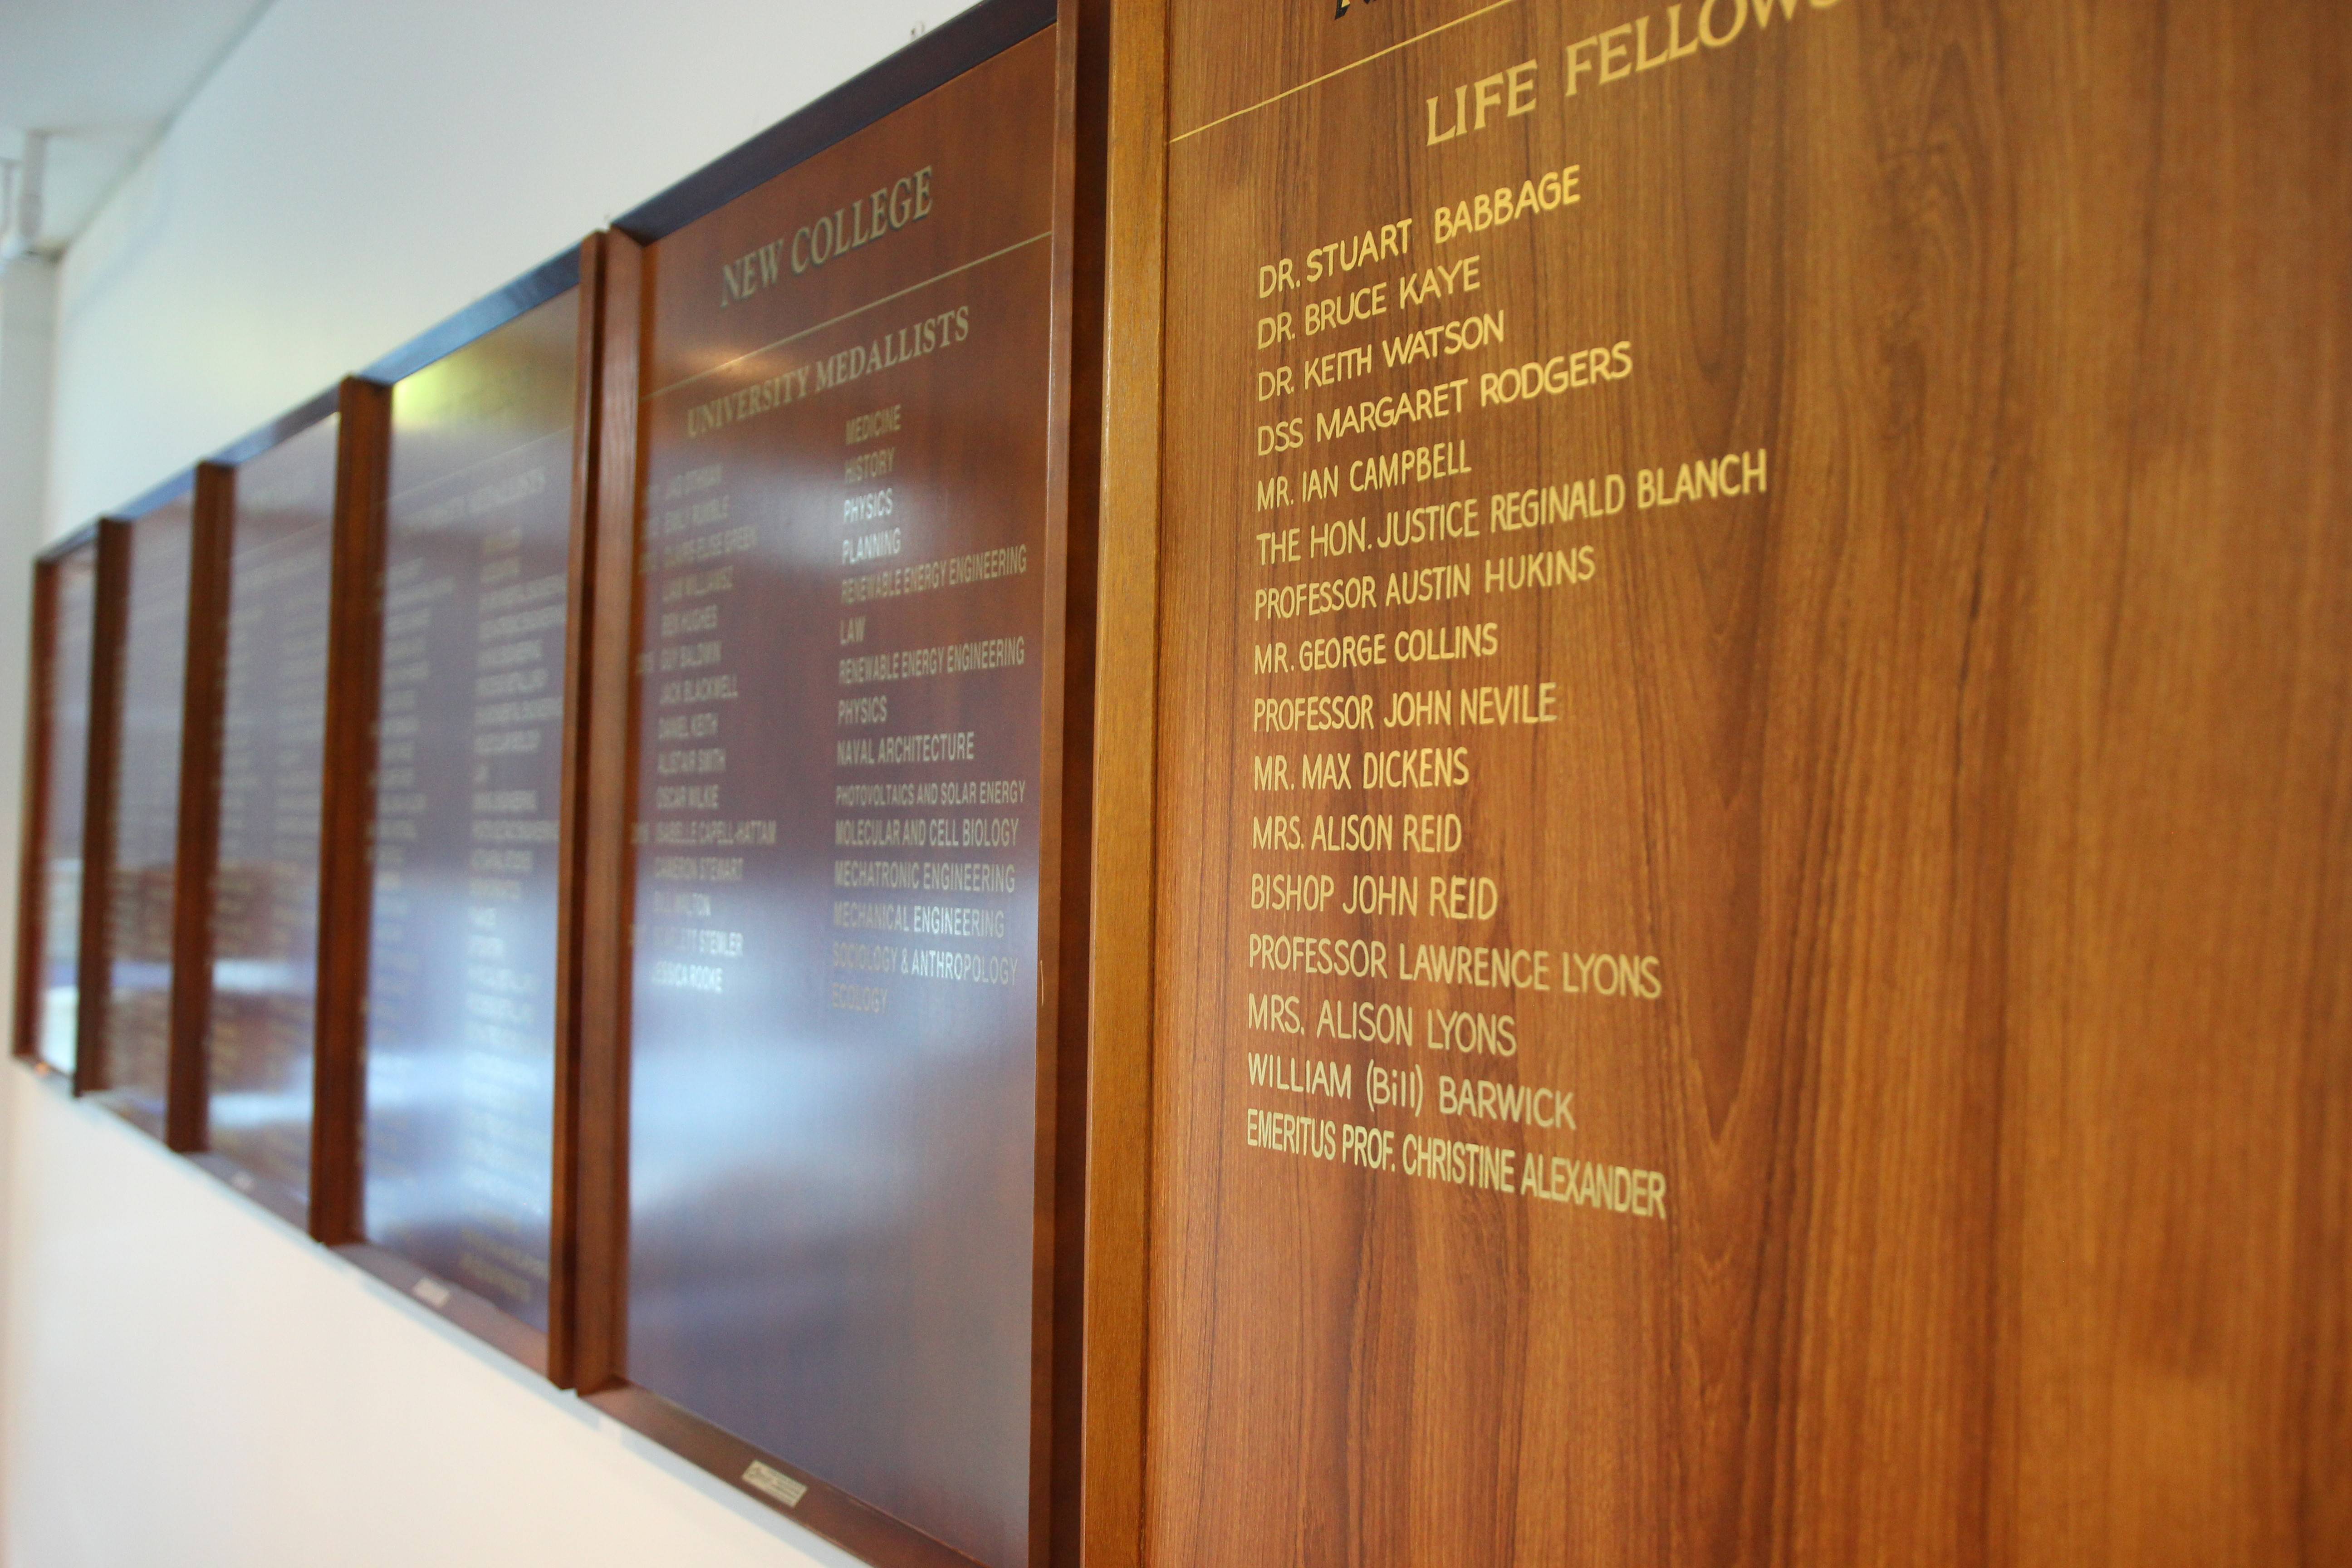 Photograph of New College Honour Boards highlighting achievements of past residents